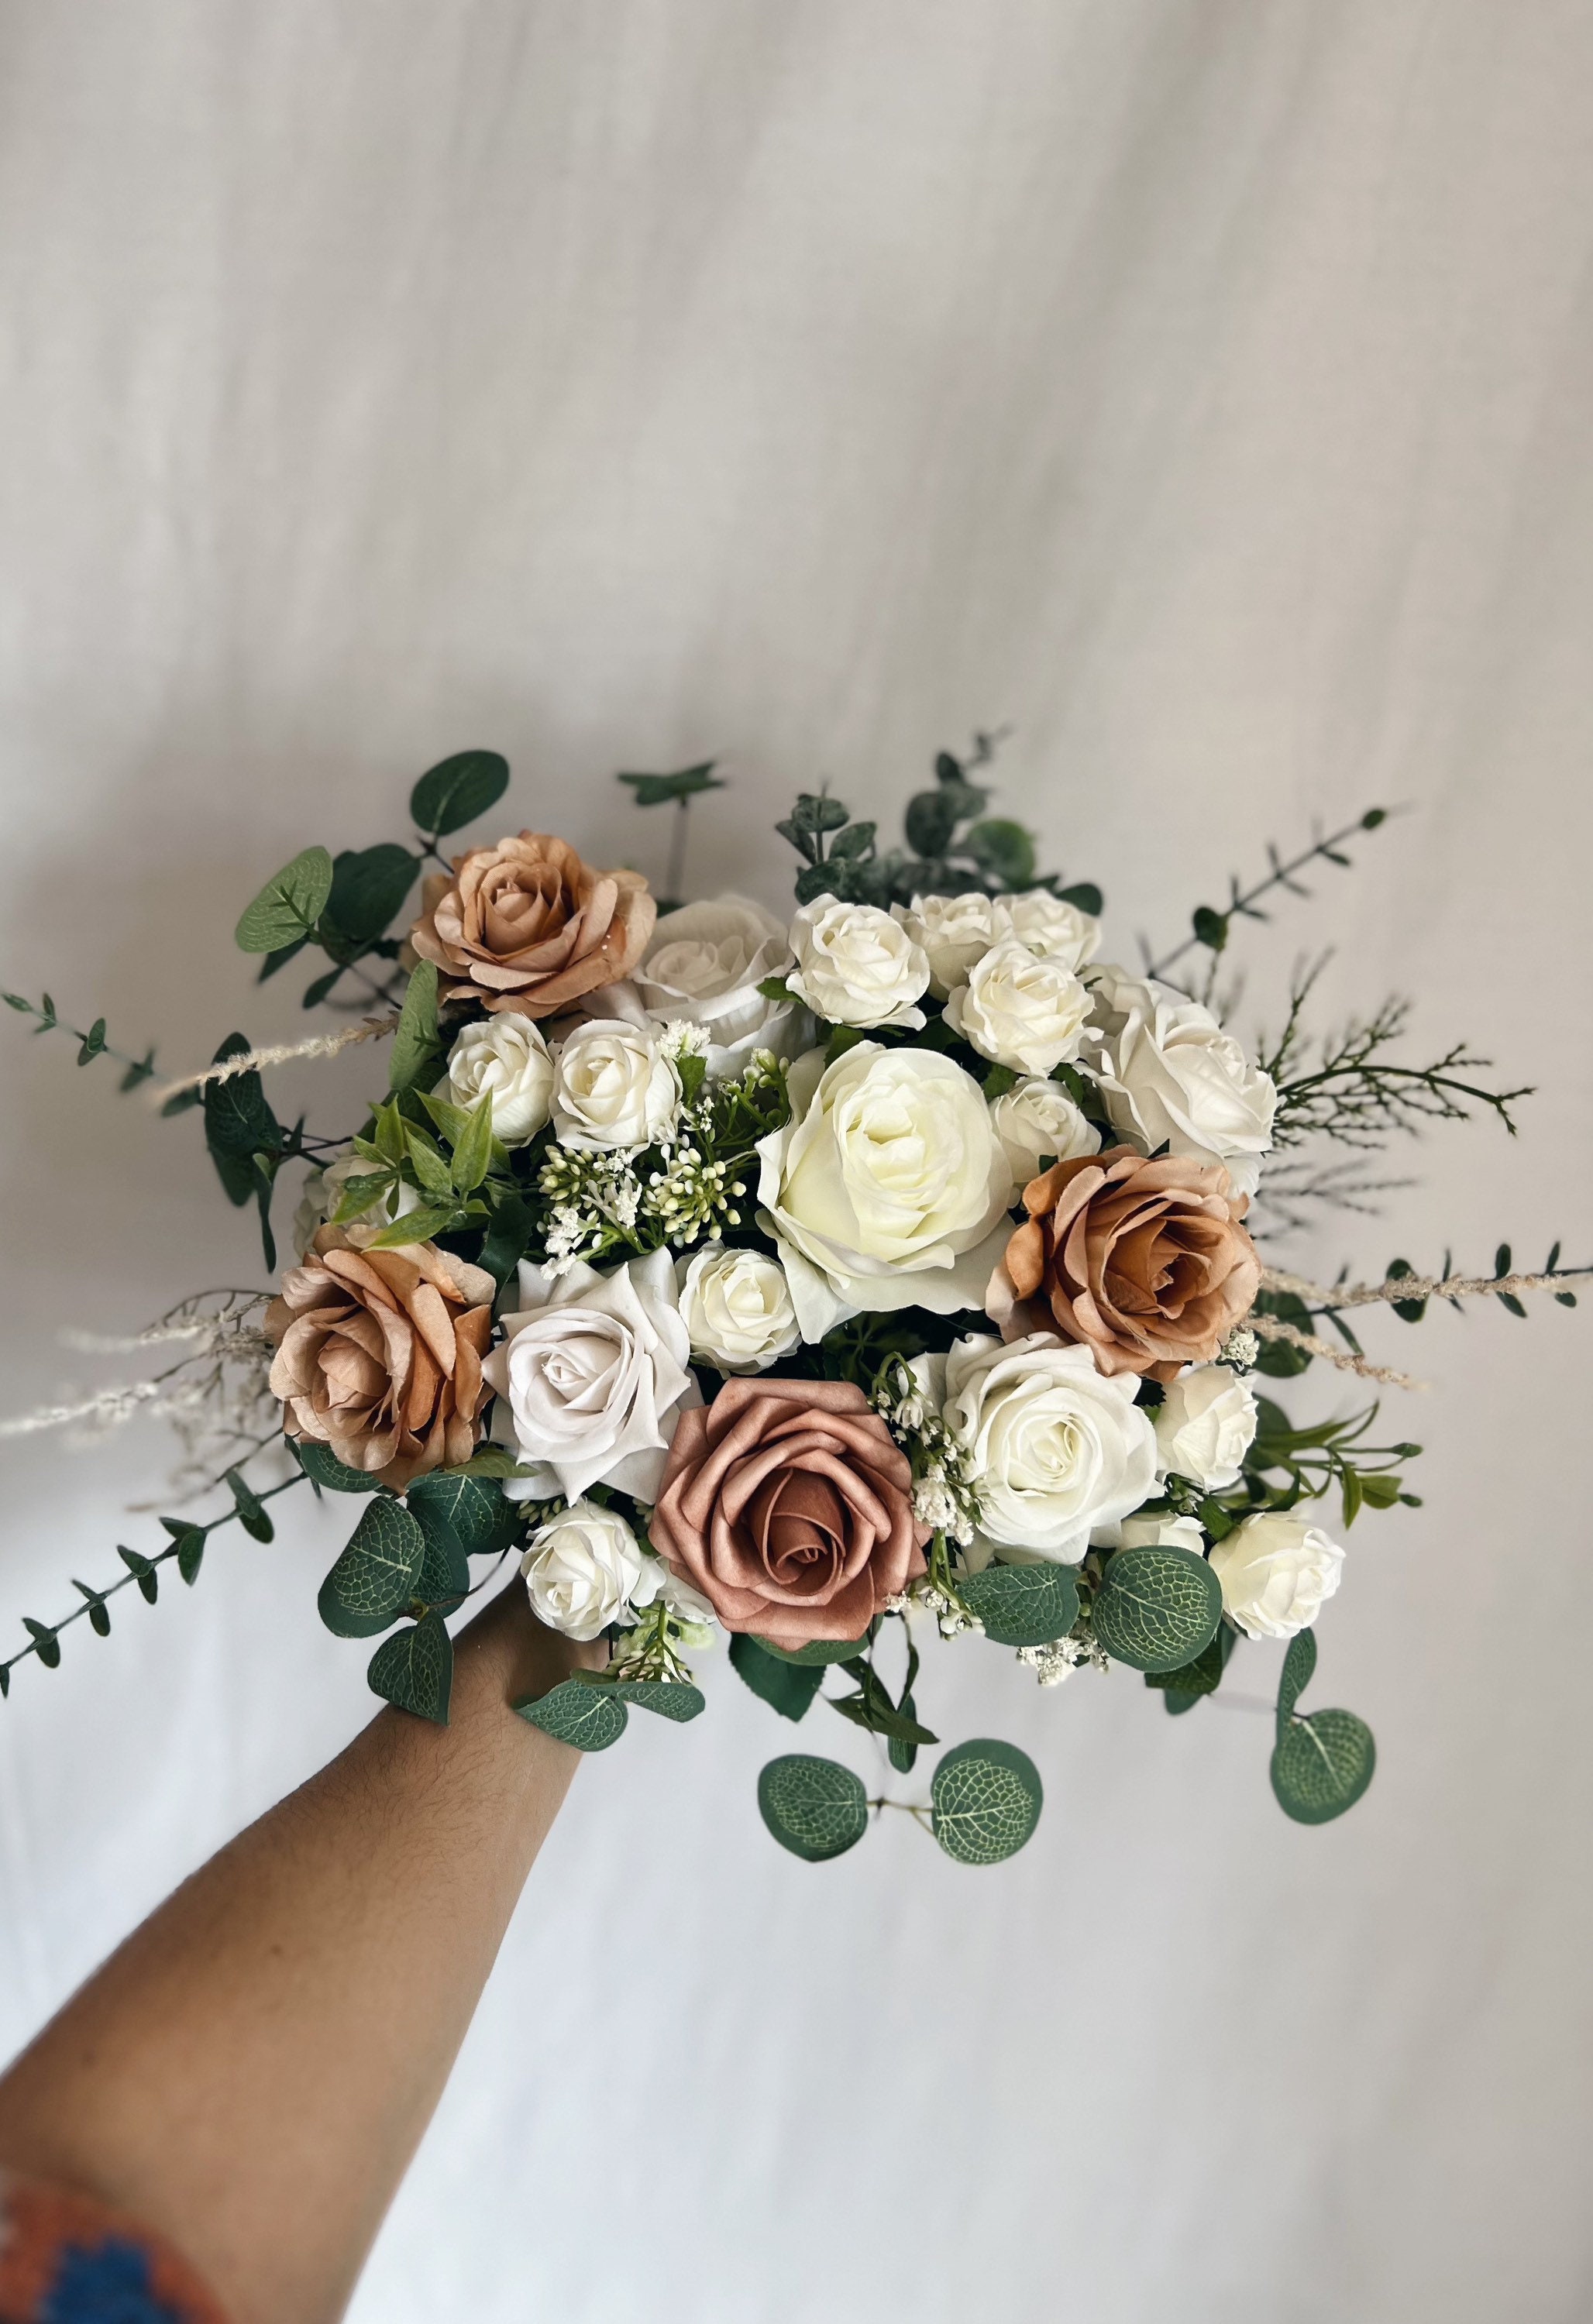 Wanyng Artificial Daisies Flowers Artificial Roses Bridesmaid Wedding Bouquet Bridal Artificial Silk Flowers White